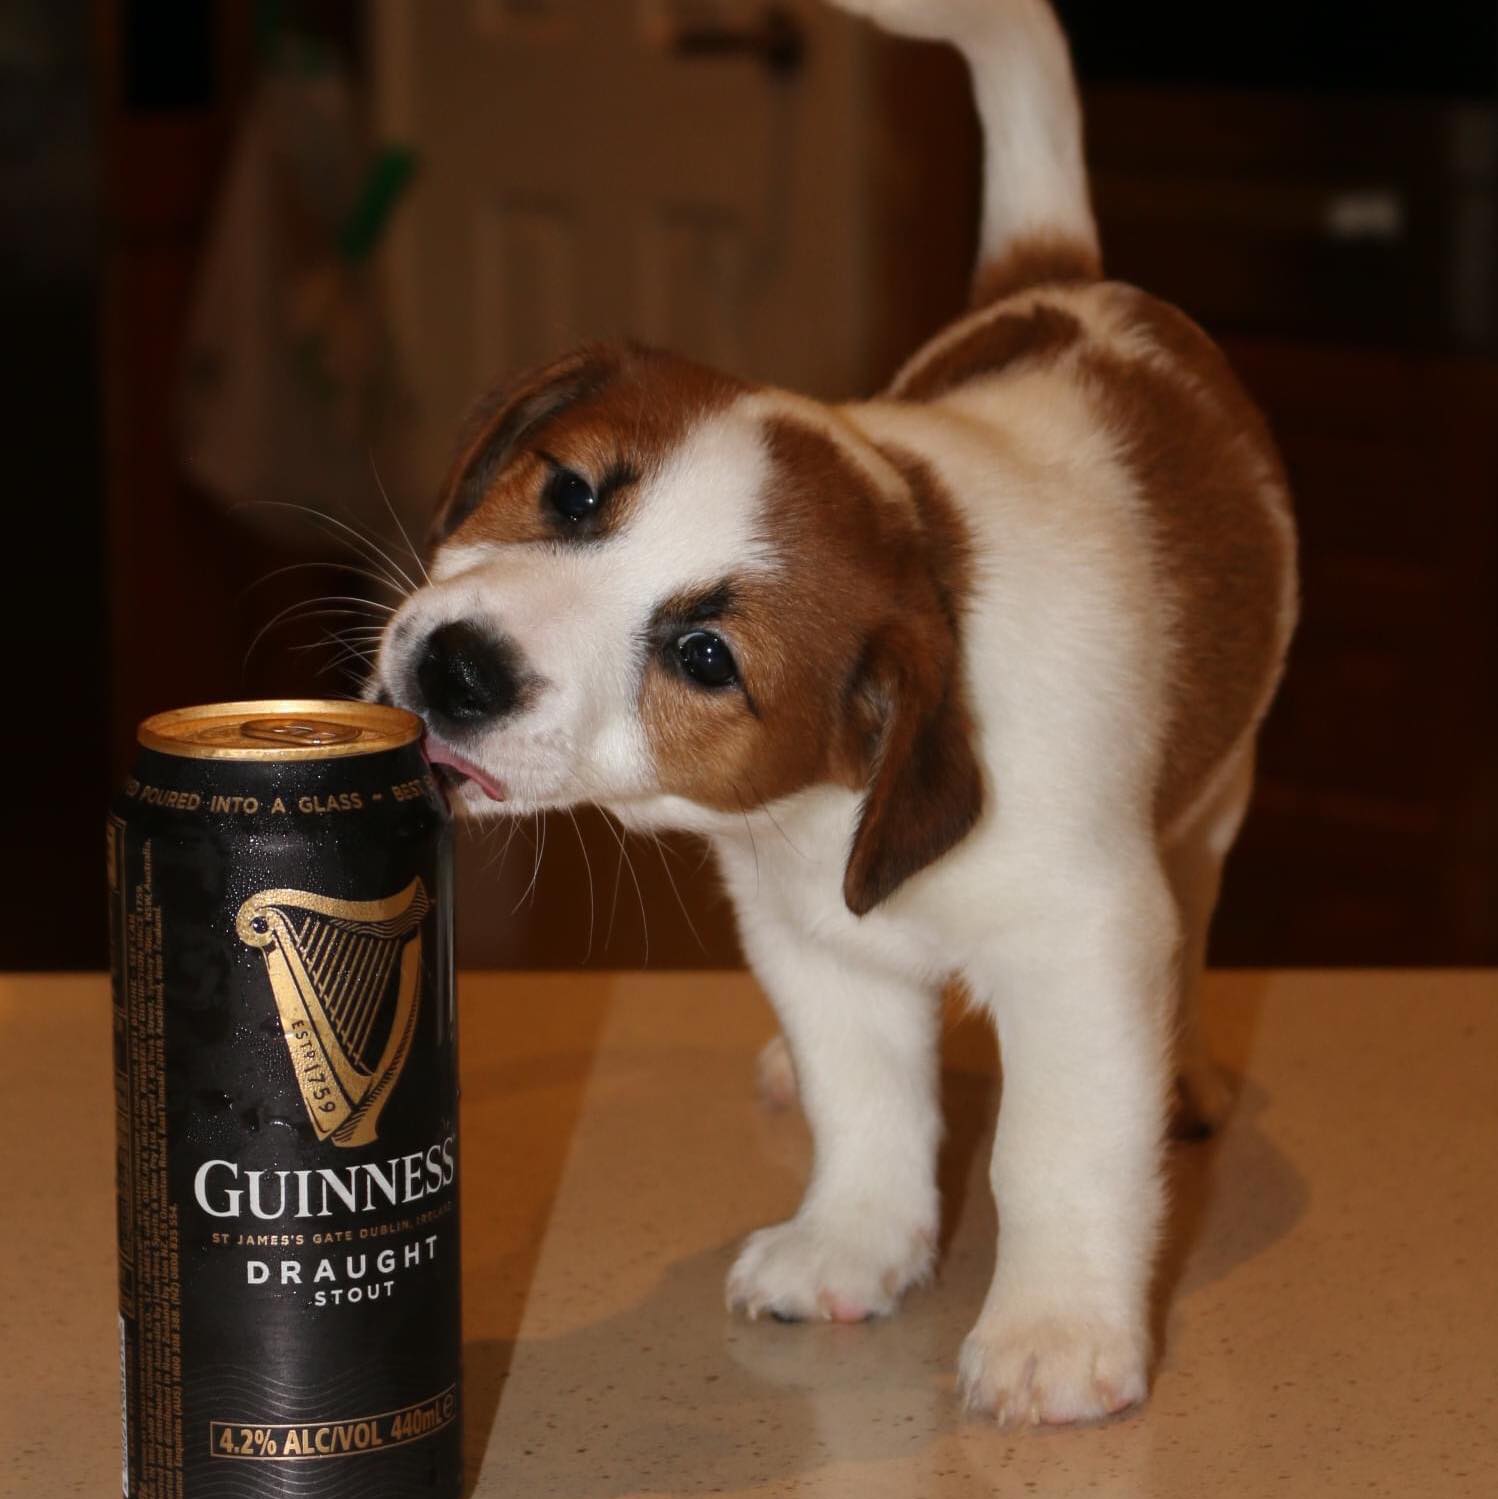 A brown and white puppy sniffing a can of guinness